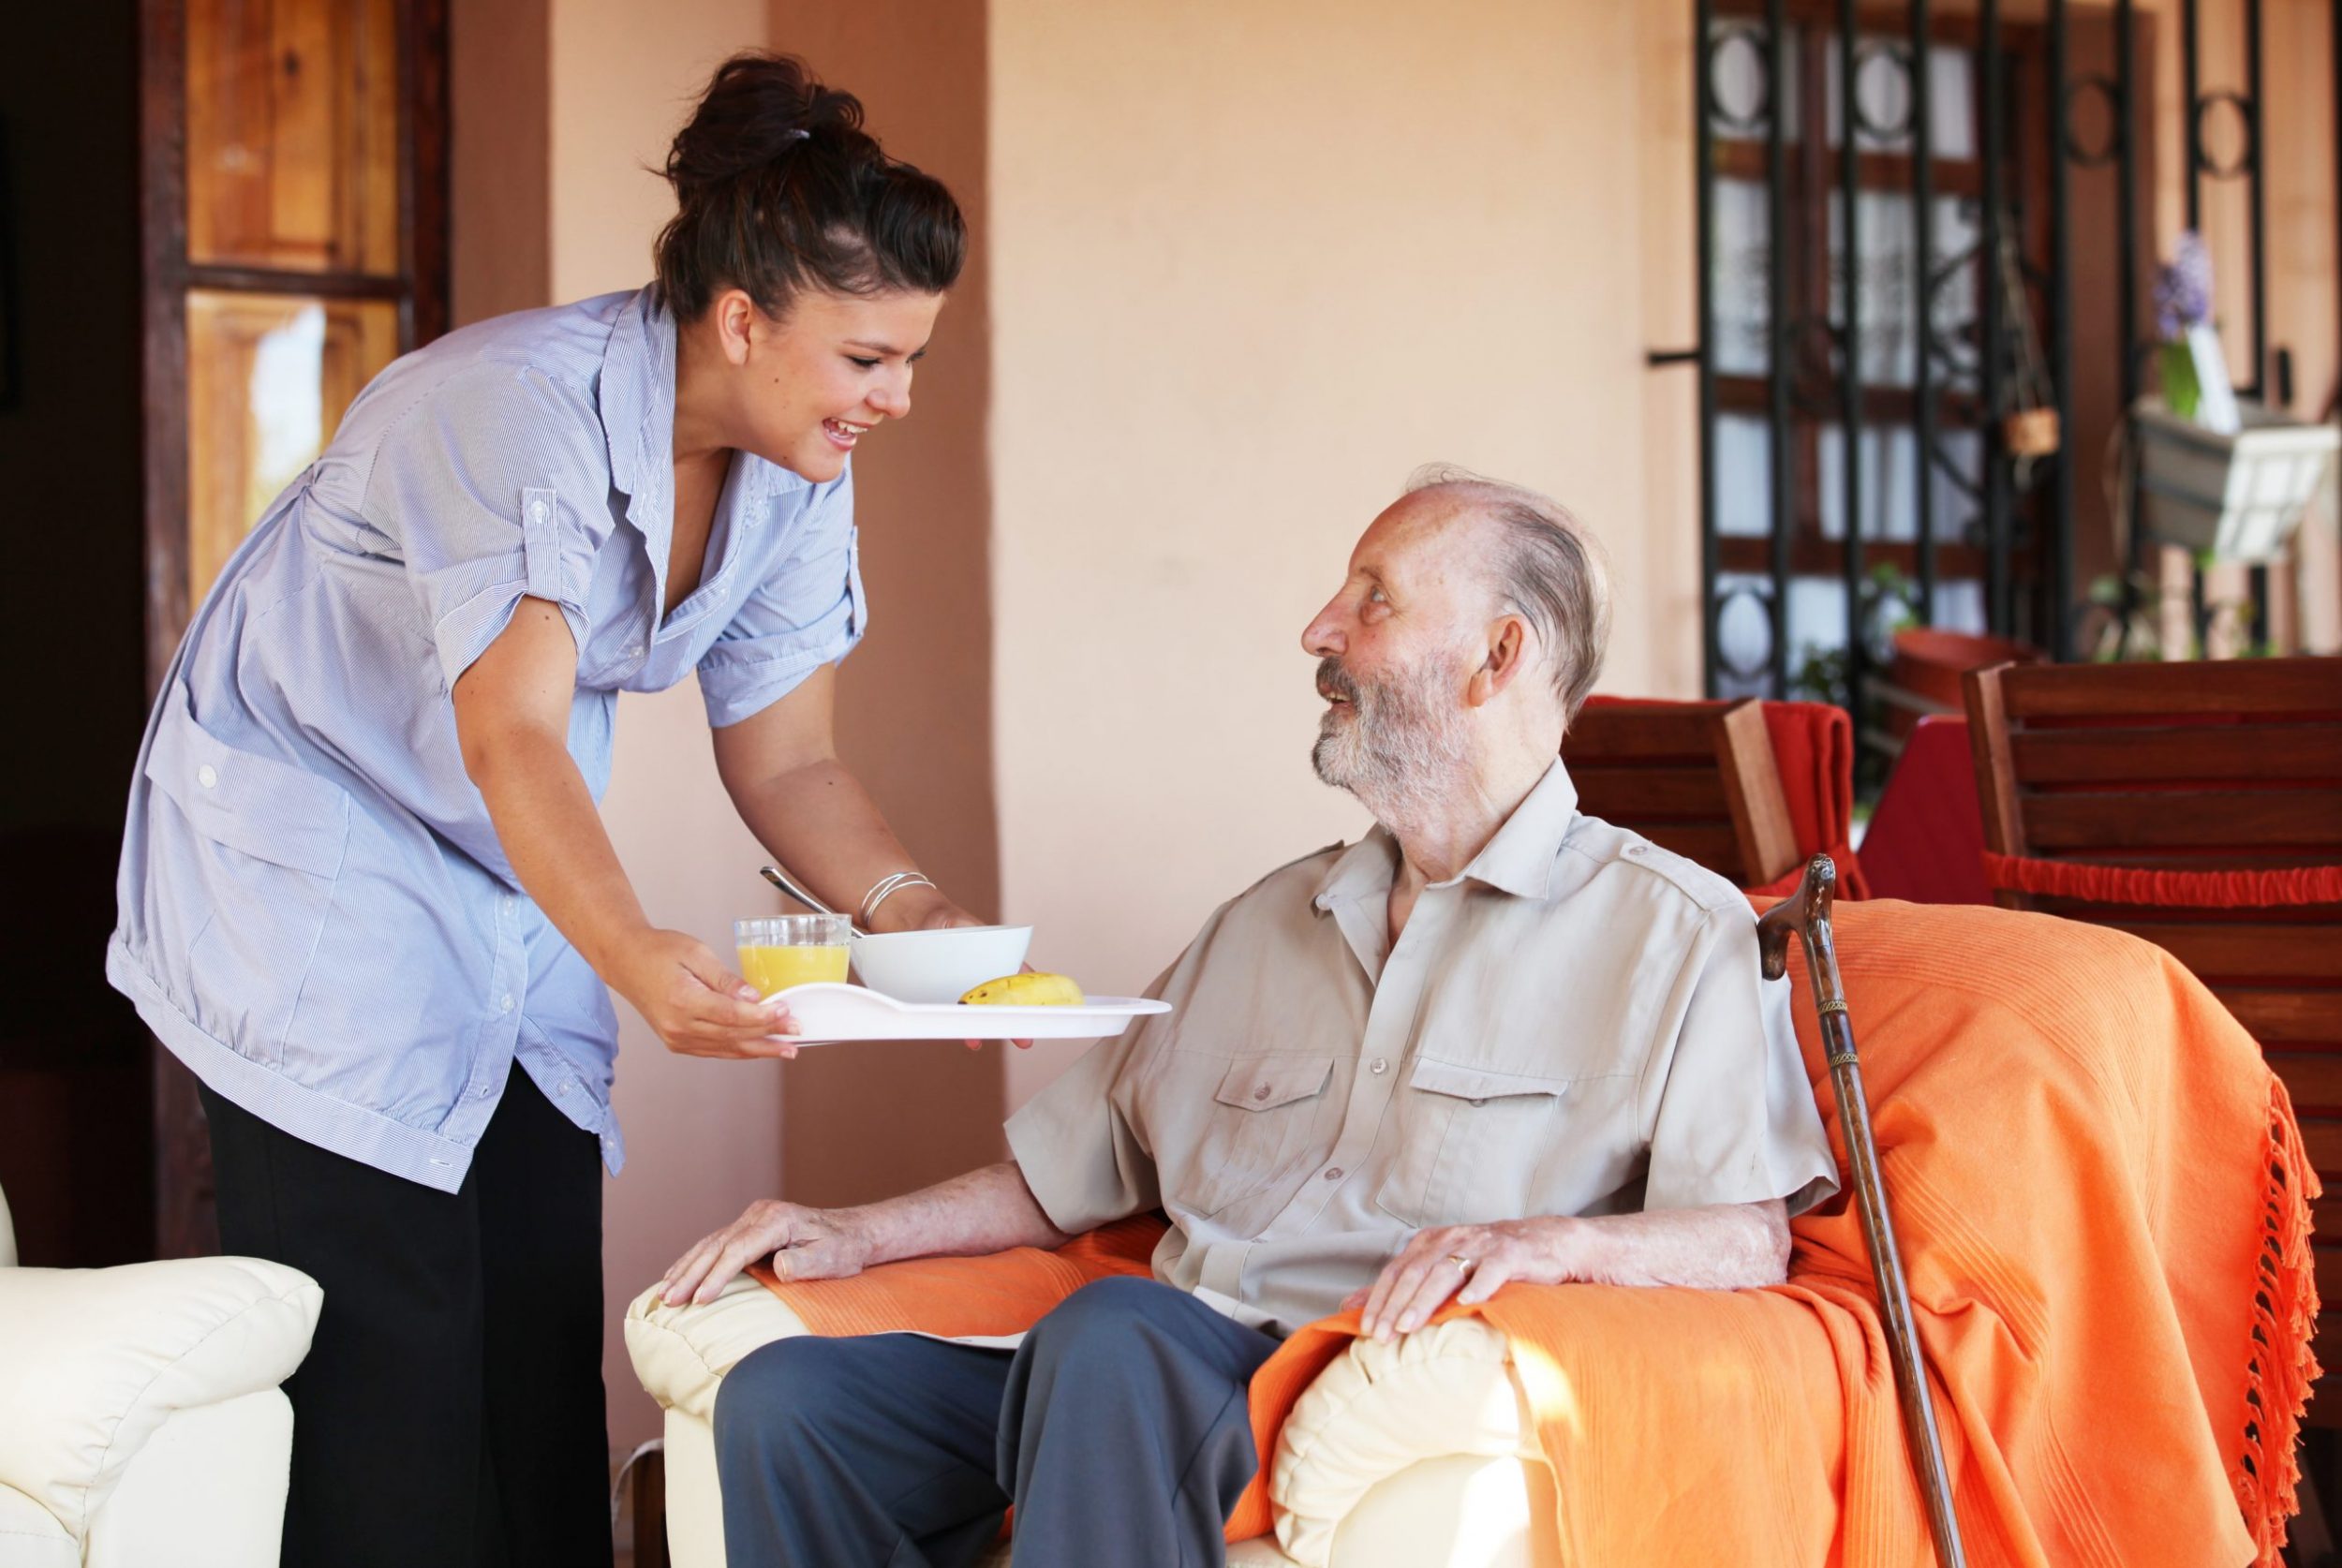 Female care home worker giving tray of food to seated care home resident.